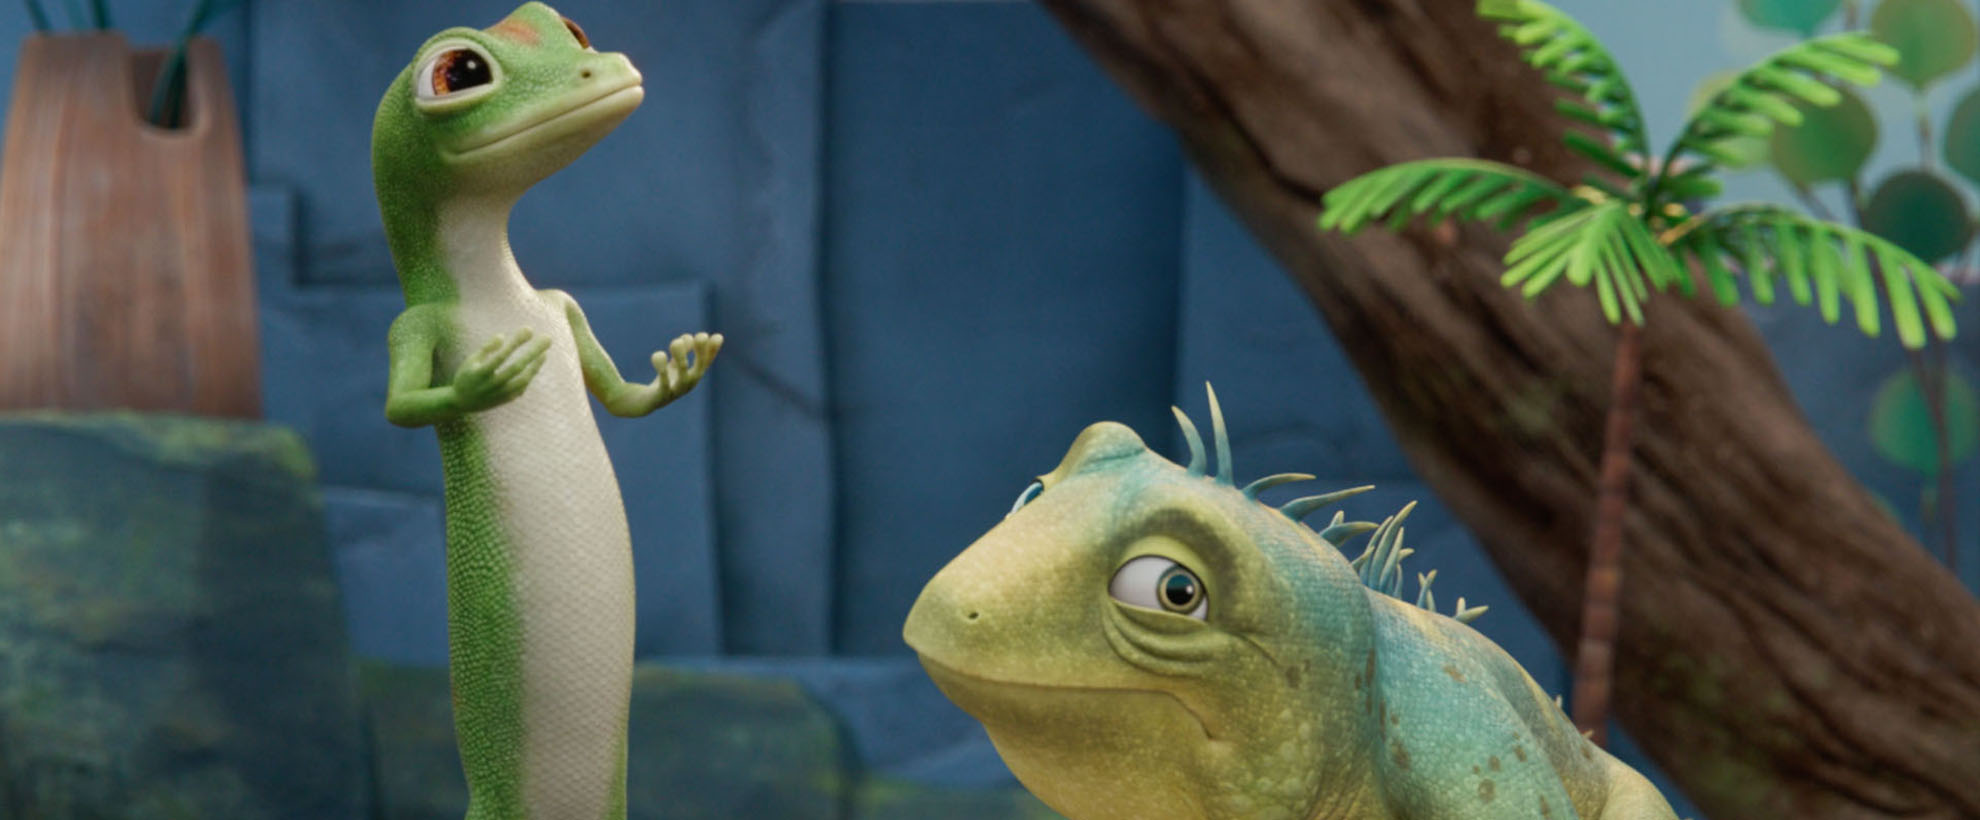 The GEICO Gecko with Leo from Leo the Lizard